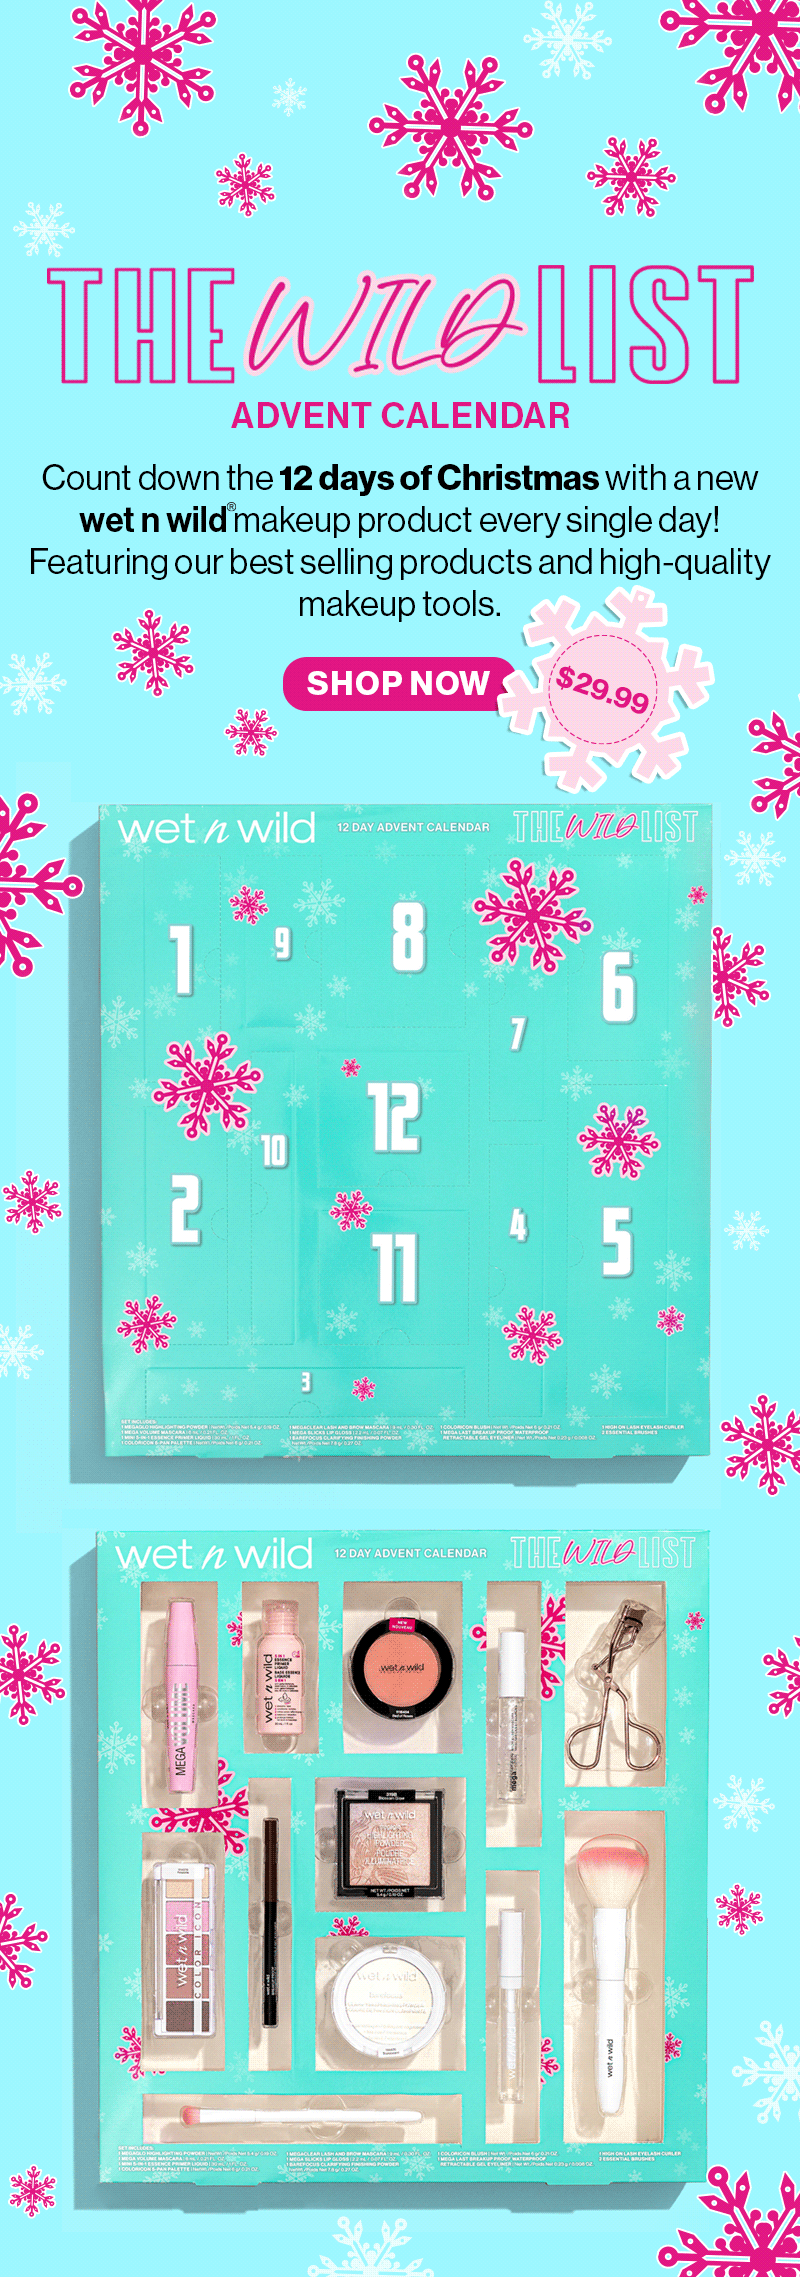 The Wild List- Advent Calendar | Countdown the 12 days of Christmas with a new wet n wild product every single day! Featuring our best selling products and high-quality makeup tools. | SHOP NOW | \\$29.99